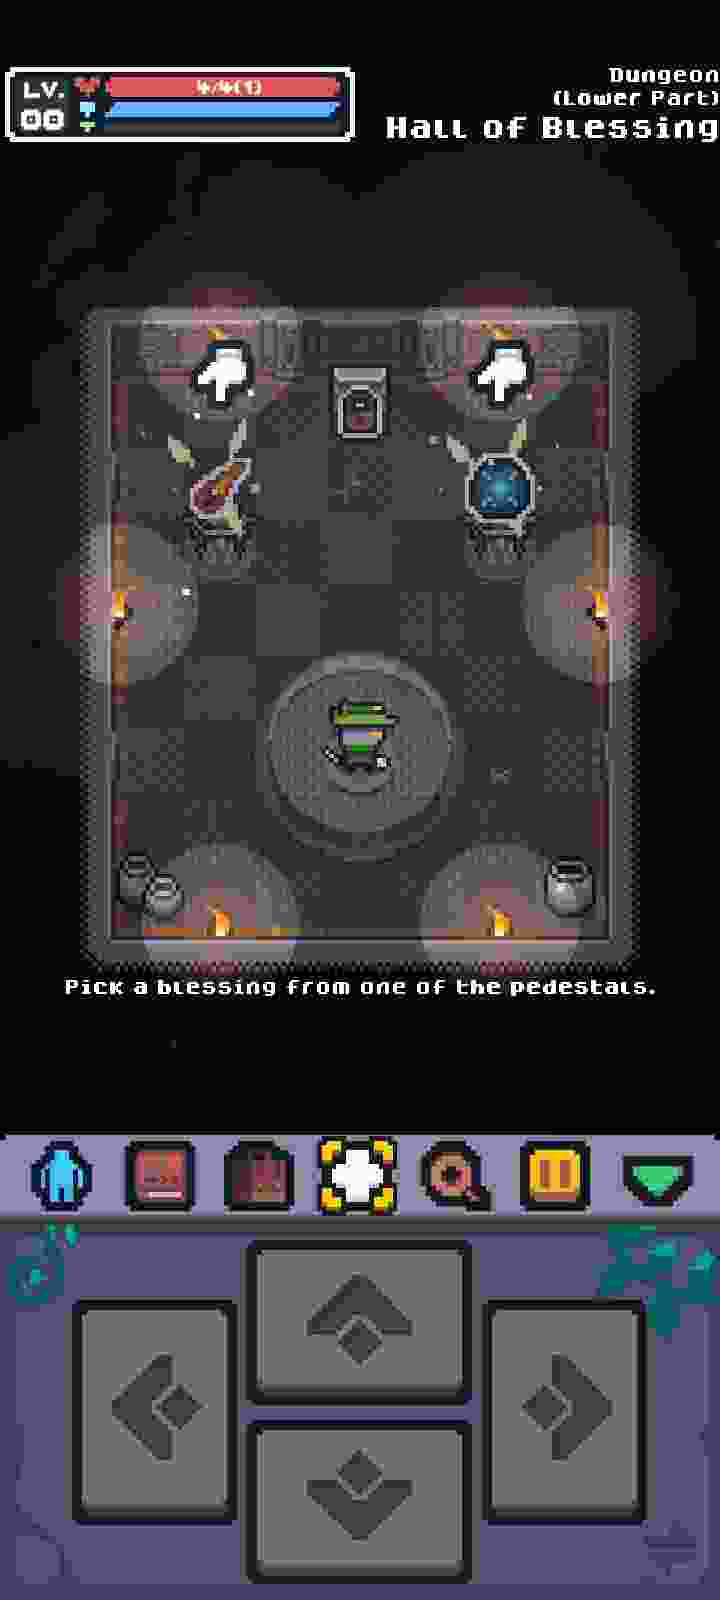 Guidus Pixel Roguelike Rpg apk, wiki, tips, tricks, guide, best heroes, starters, blessings, abyss, arcade, bosses, change destiny, coupon code, level expansion character guide, etc.